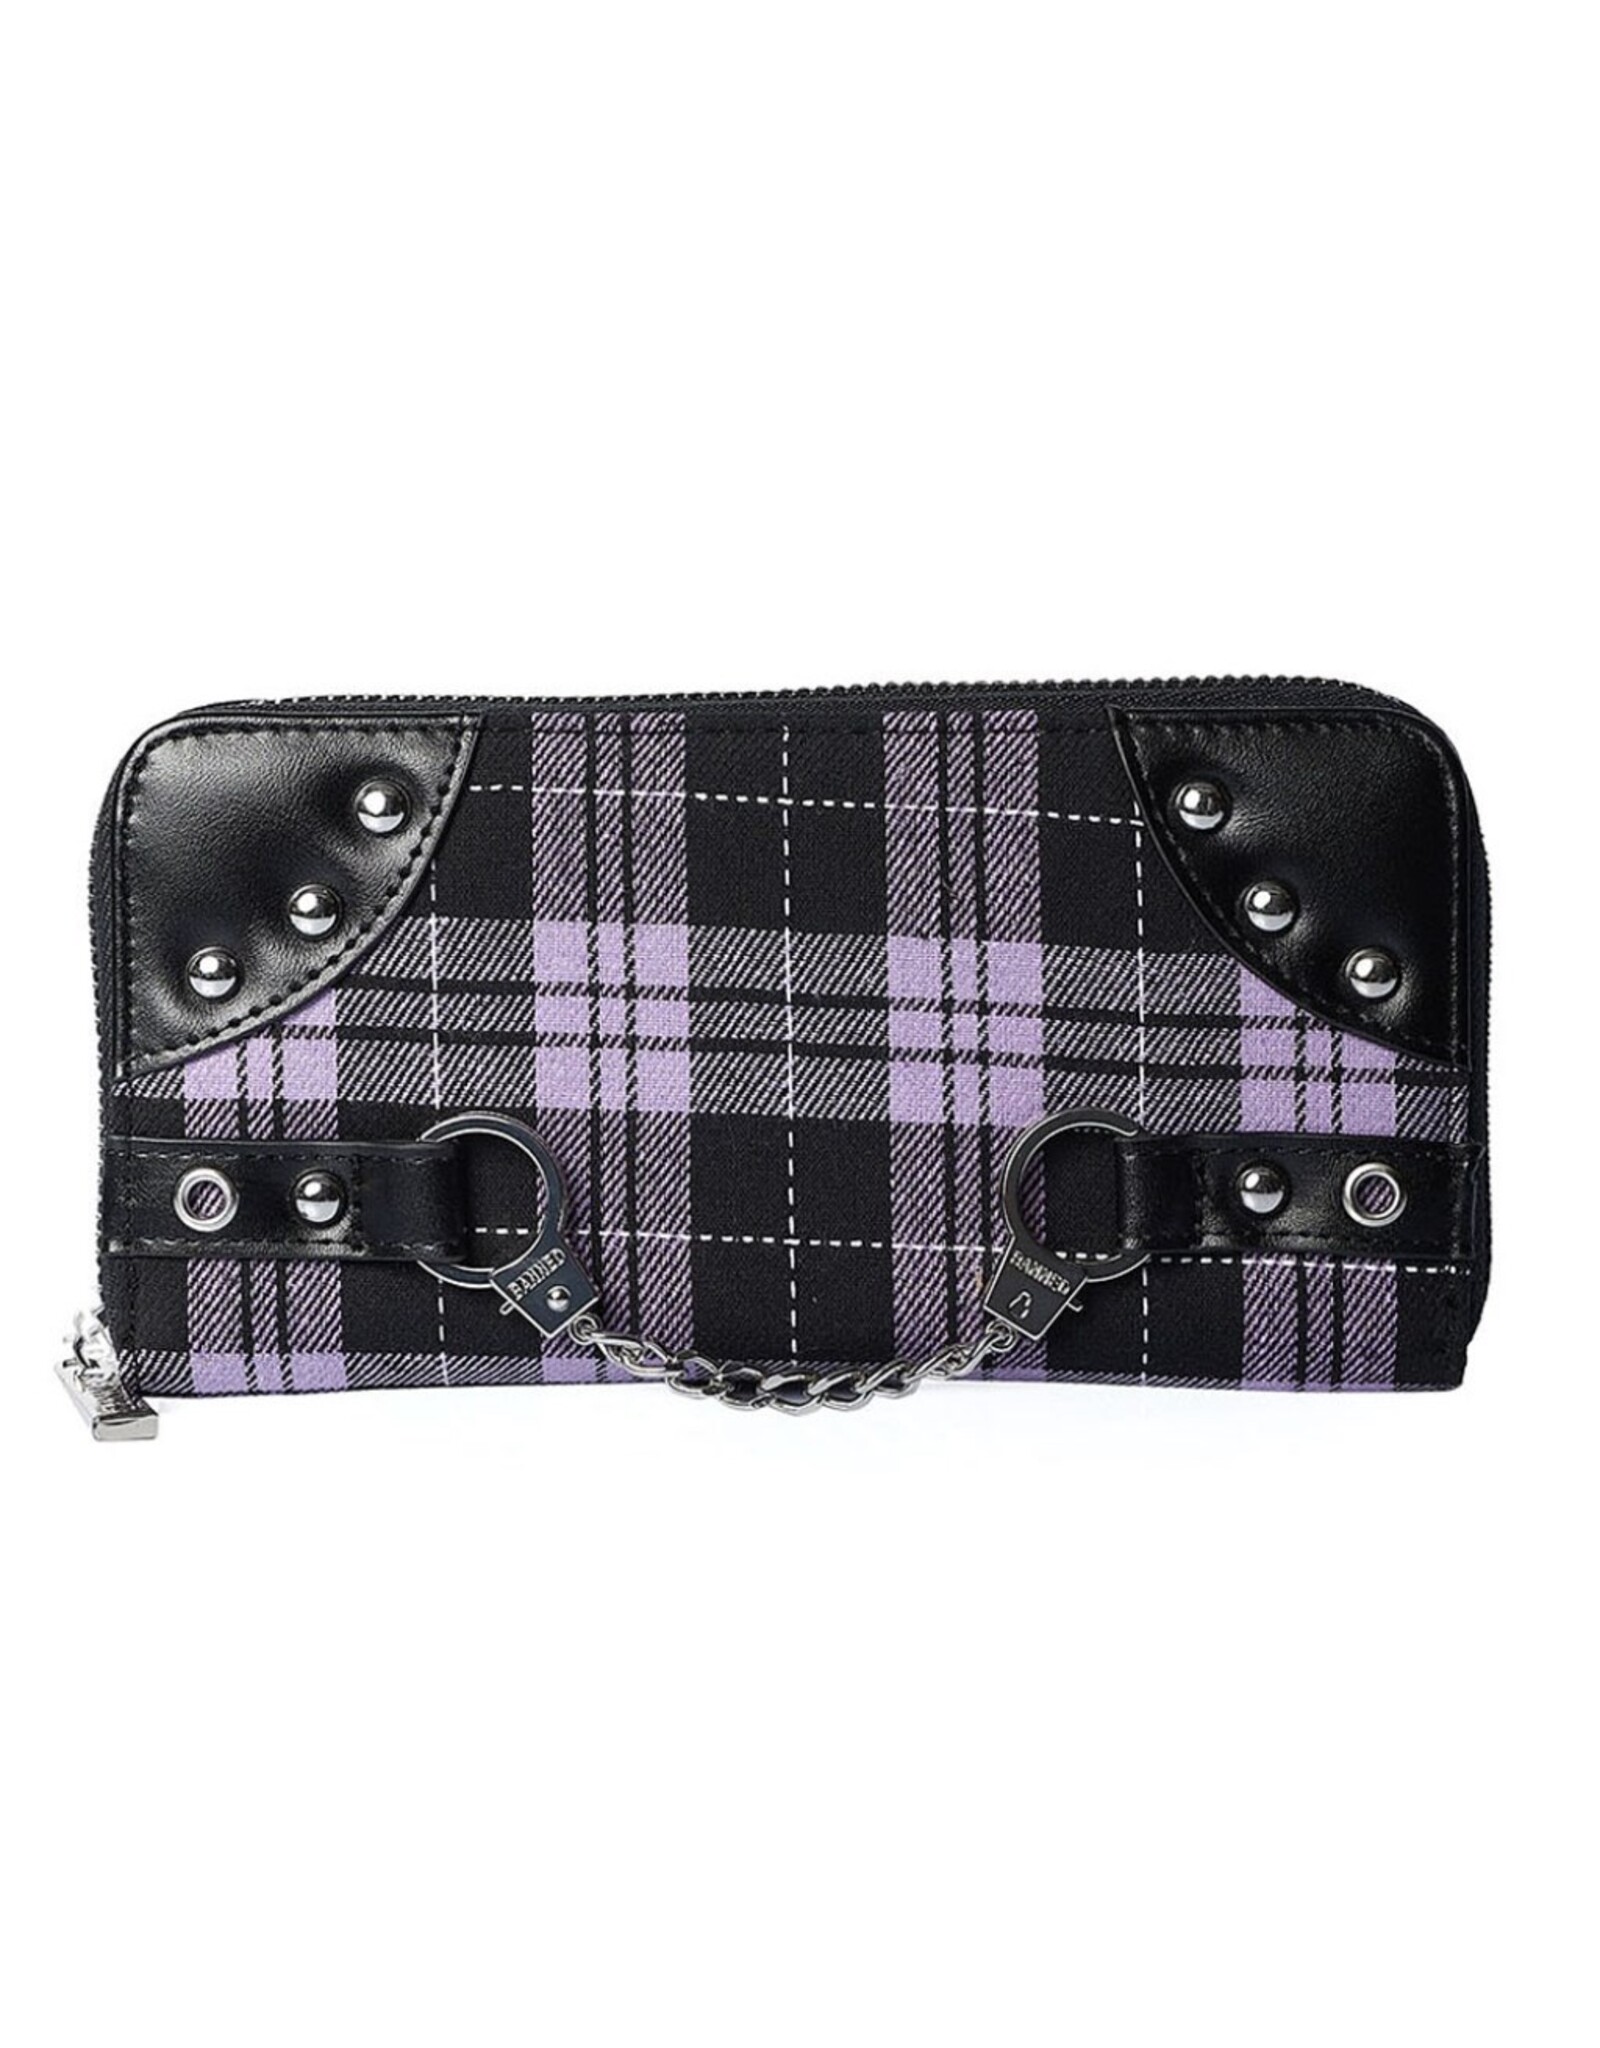 Banned Gothic wallets and Purses - Tartan Wallet with Handcuffs (purple)